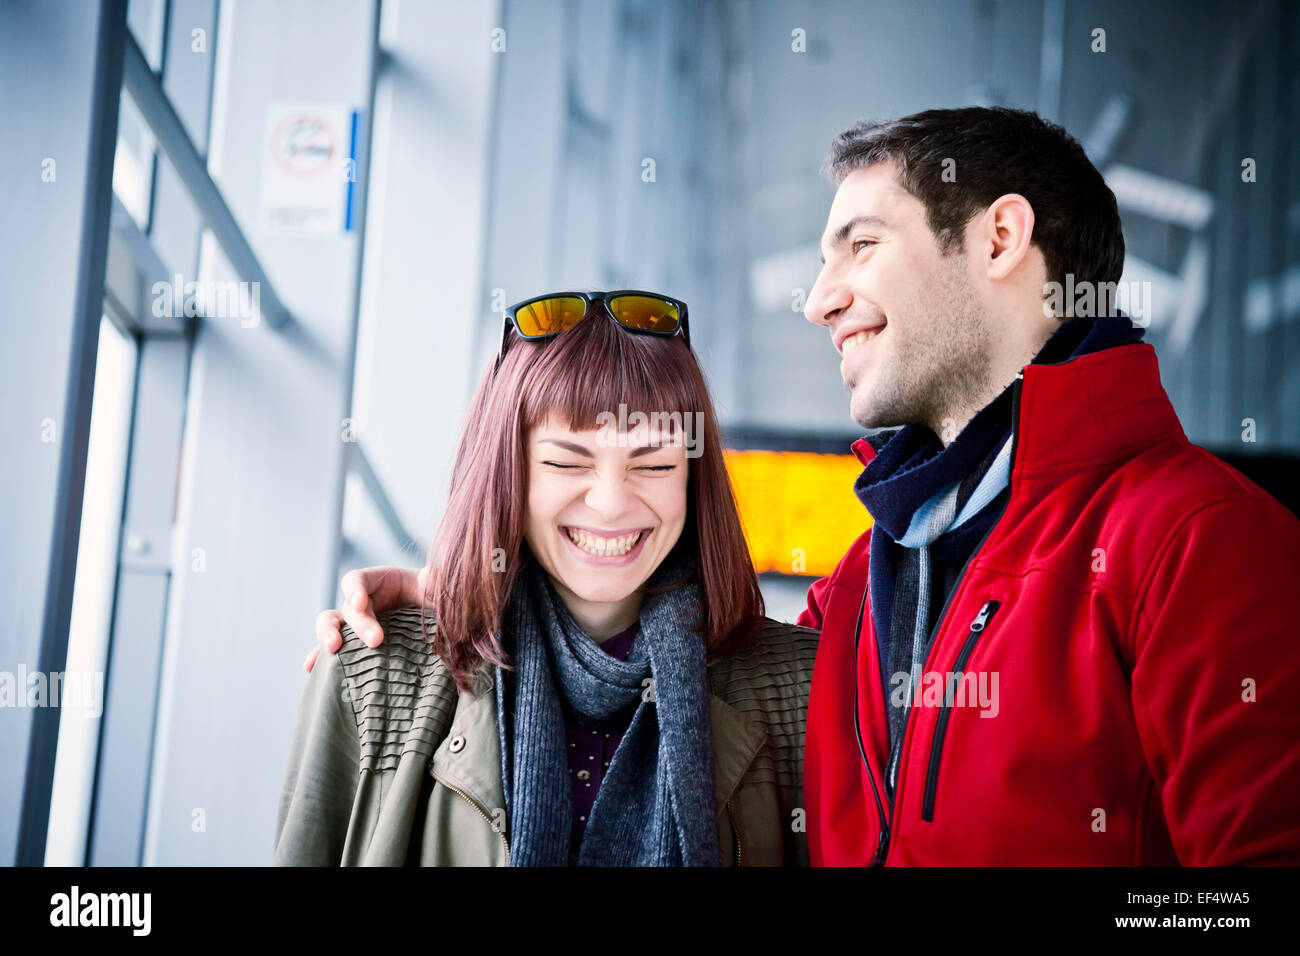 Happy young couple in airport building Stock Photo